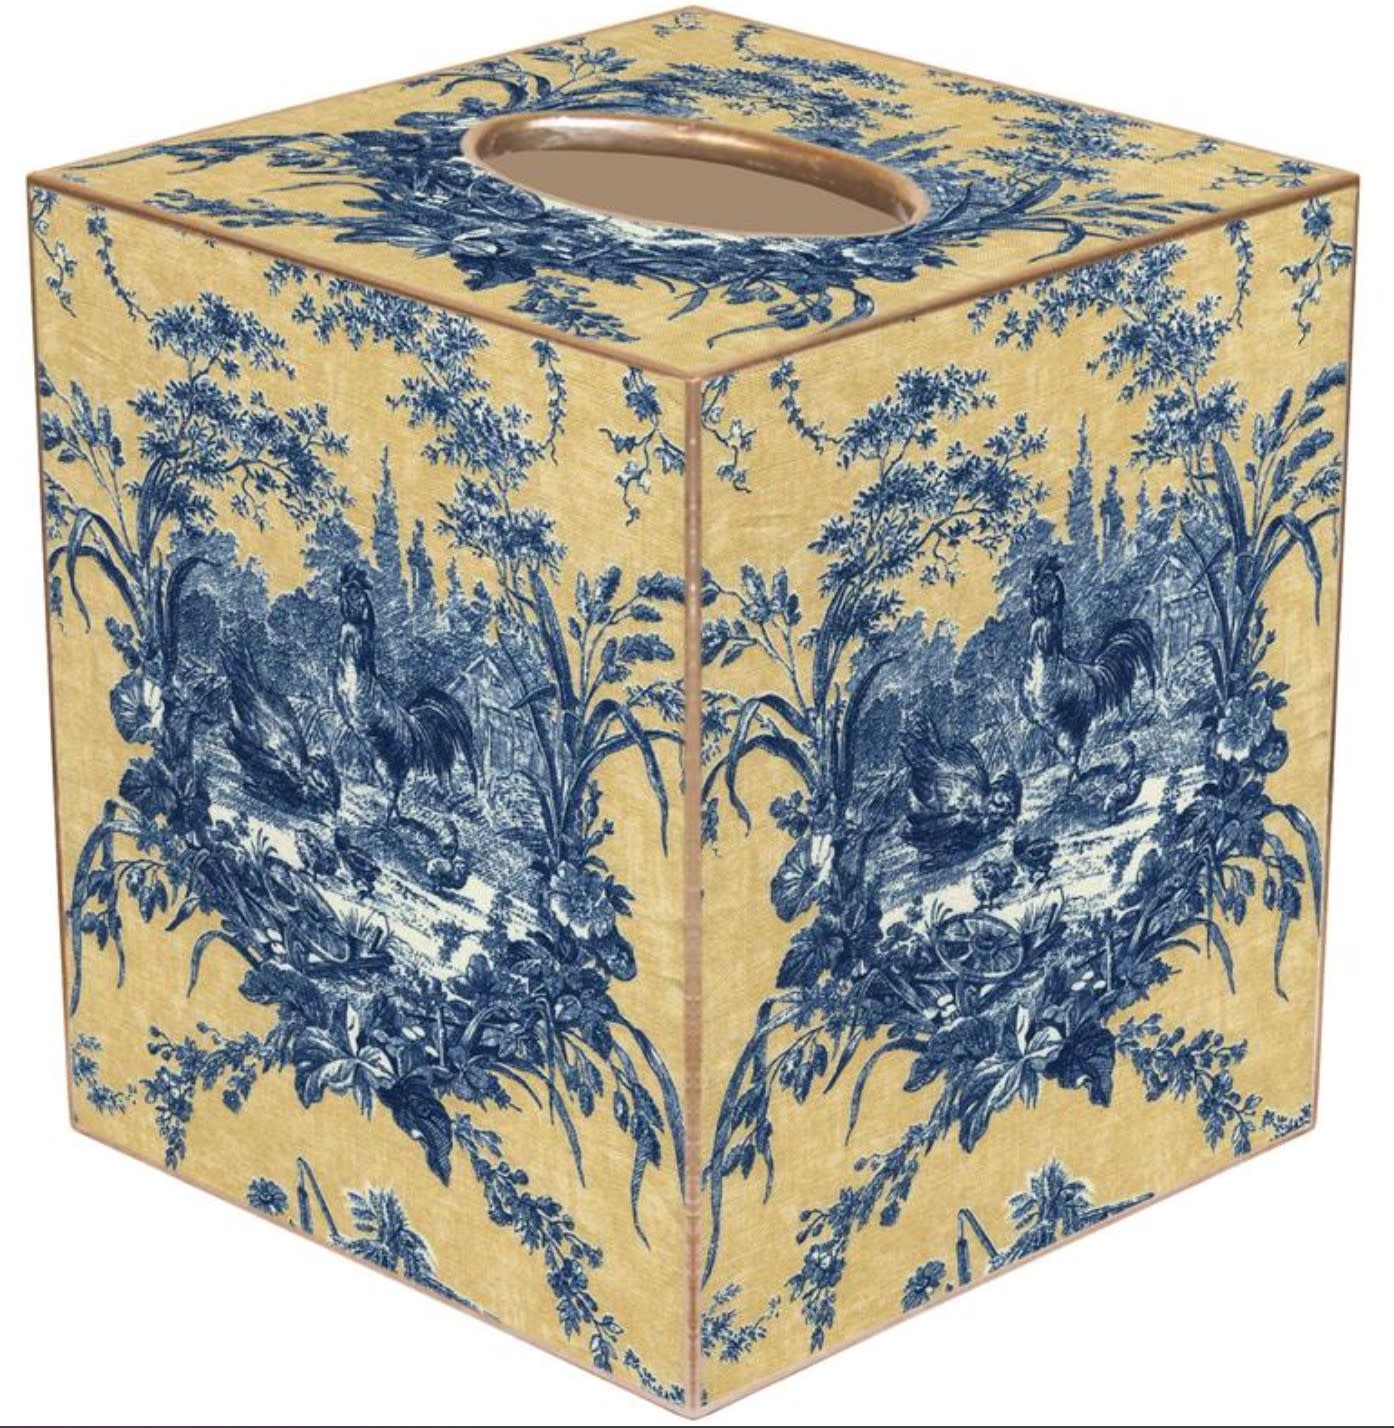 Marye-Kelley Blue and Yellow Toile Tissue Box Cover